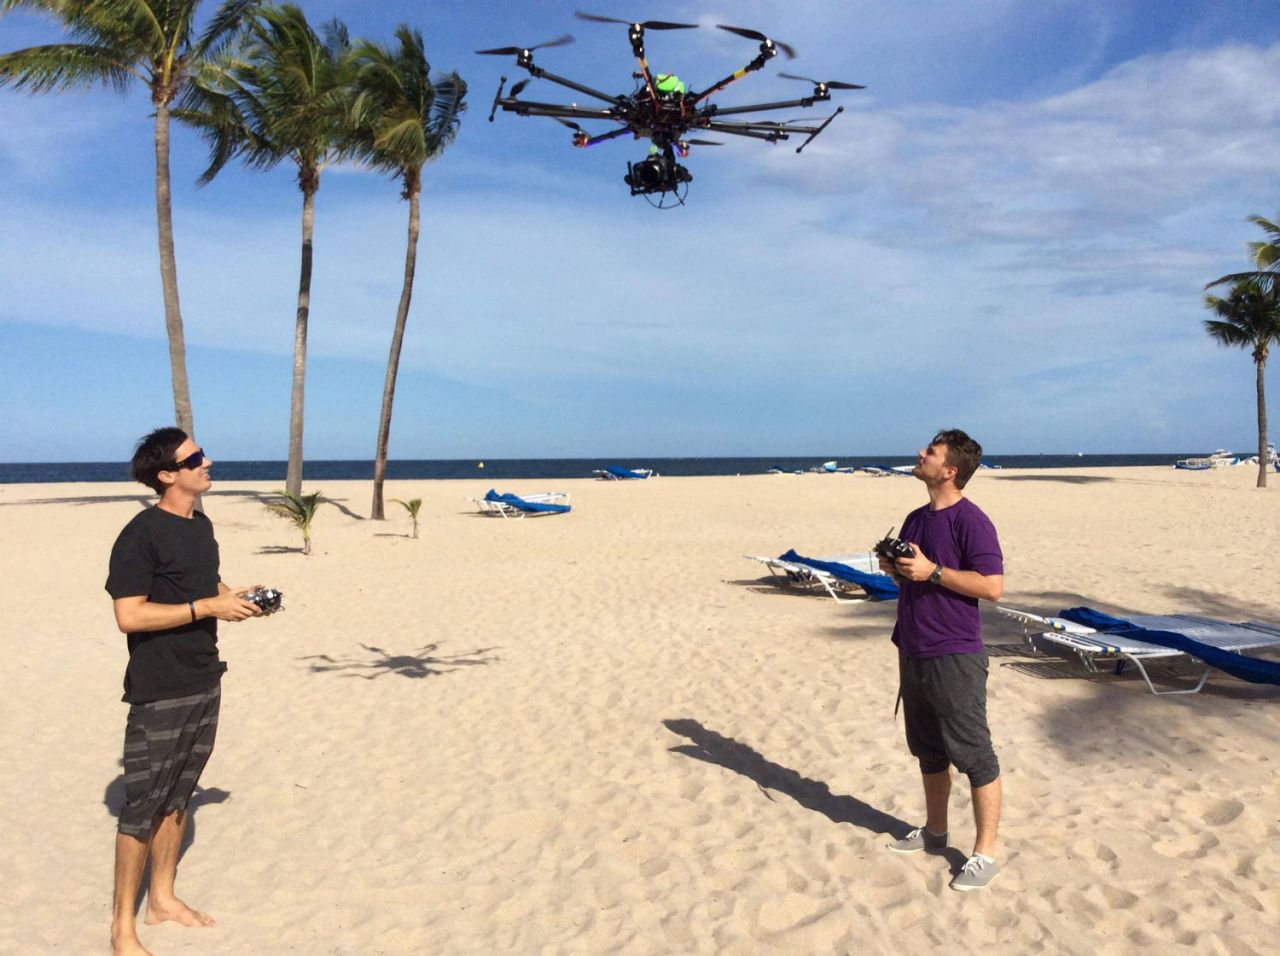 Justice L Bentz (left) and a fellow operator get one of their custom-built drones off the ground, ready to shoot another superyacht in the Caribbean.